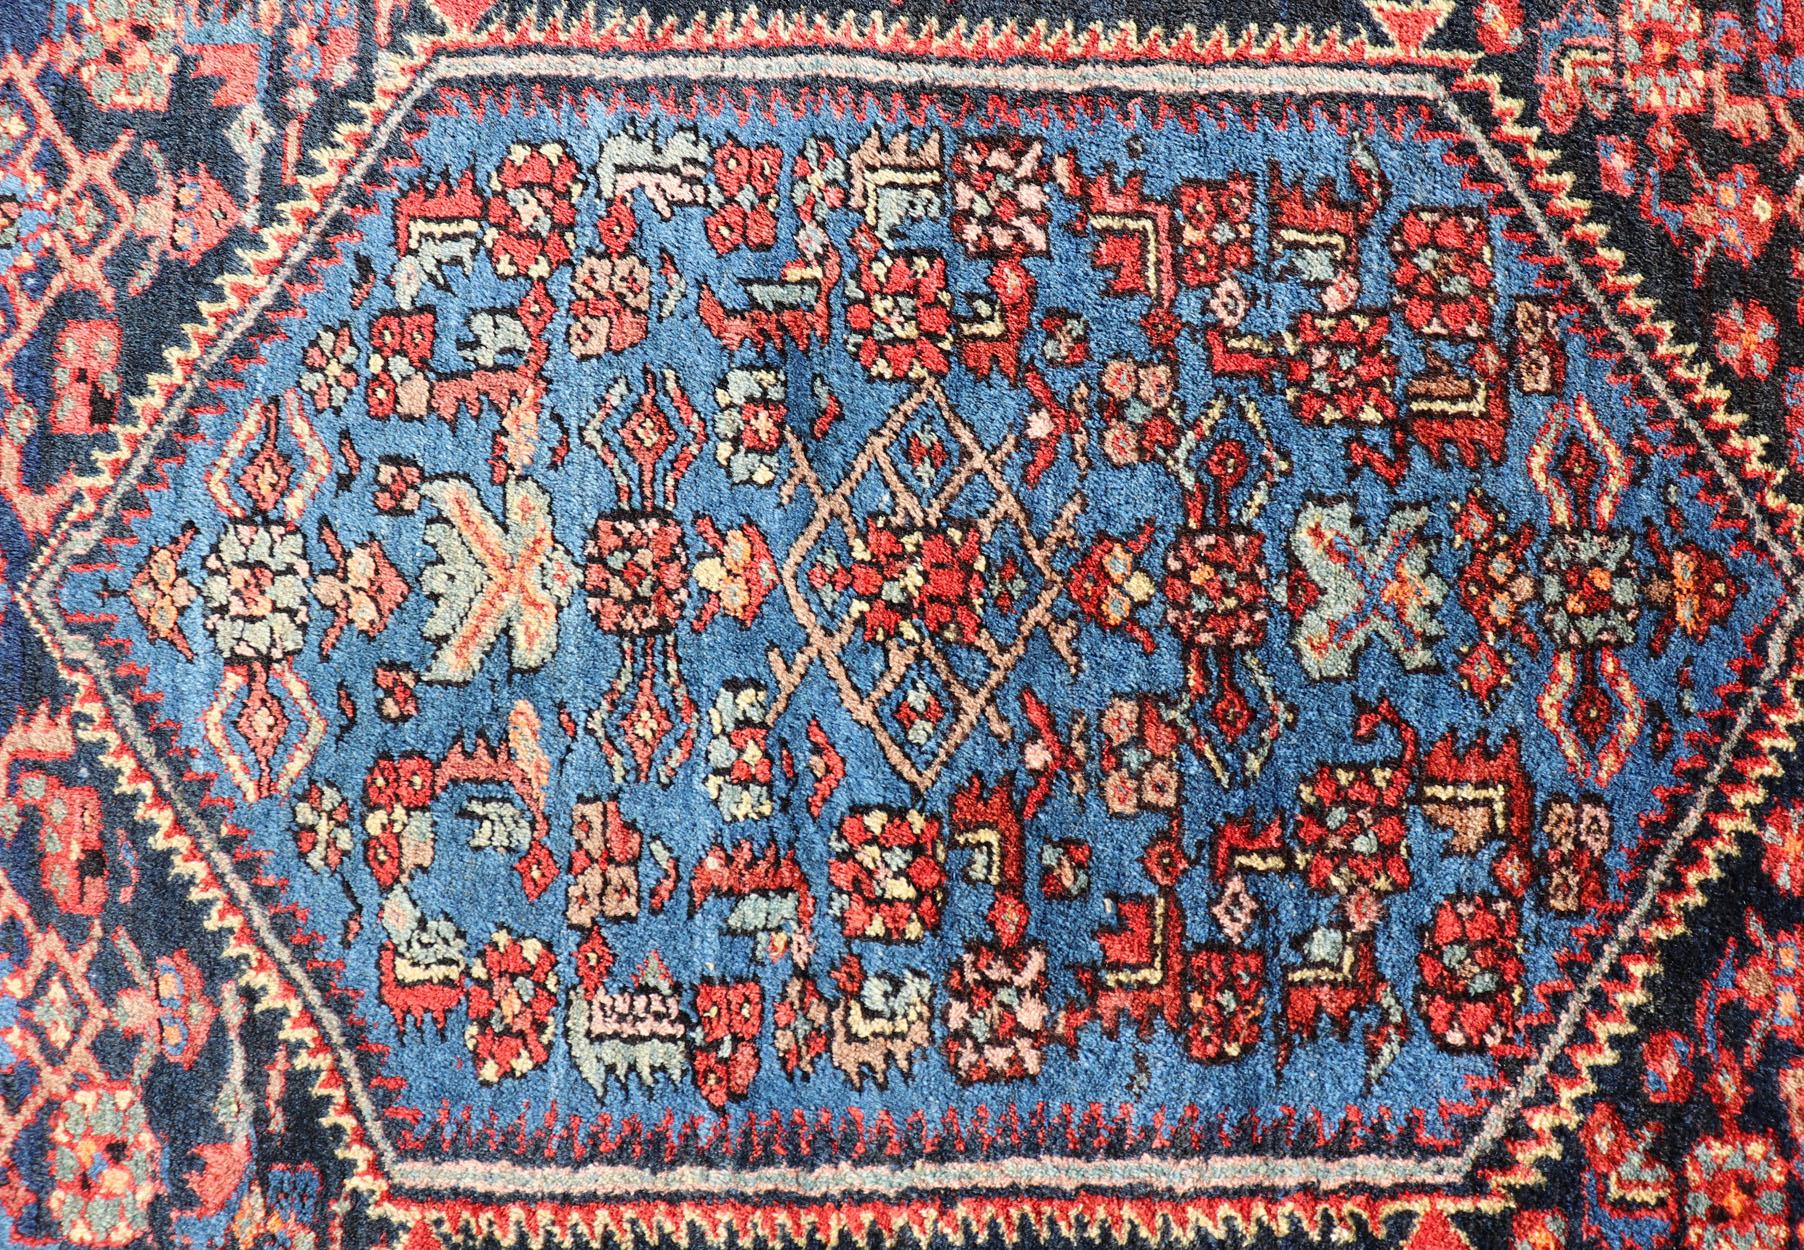 20th Century Antique Persian Bidjar Carpet with Variety of Blue Colors, Red, and Salmon For Sale